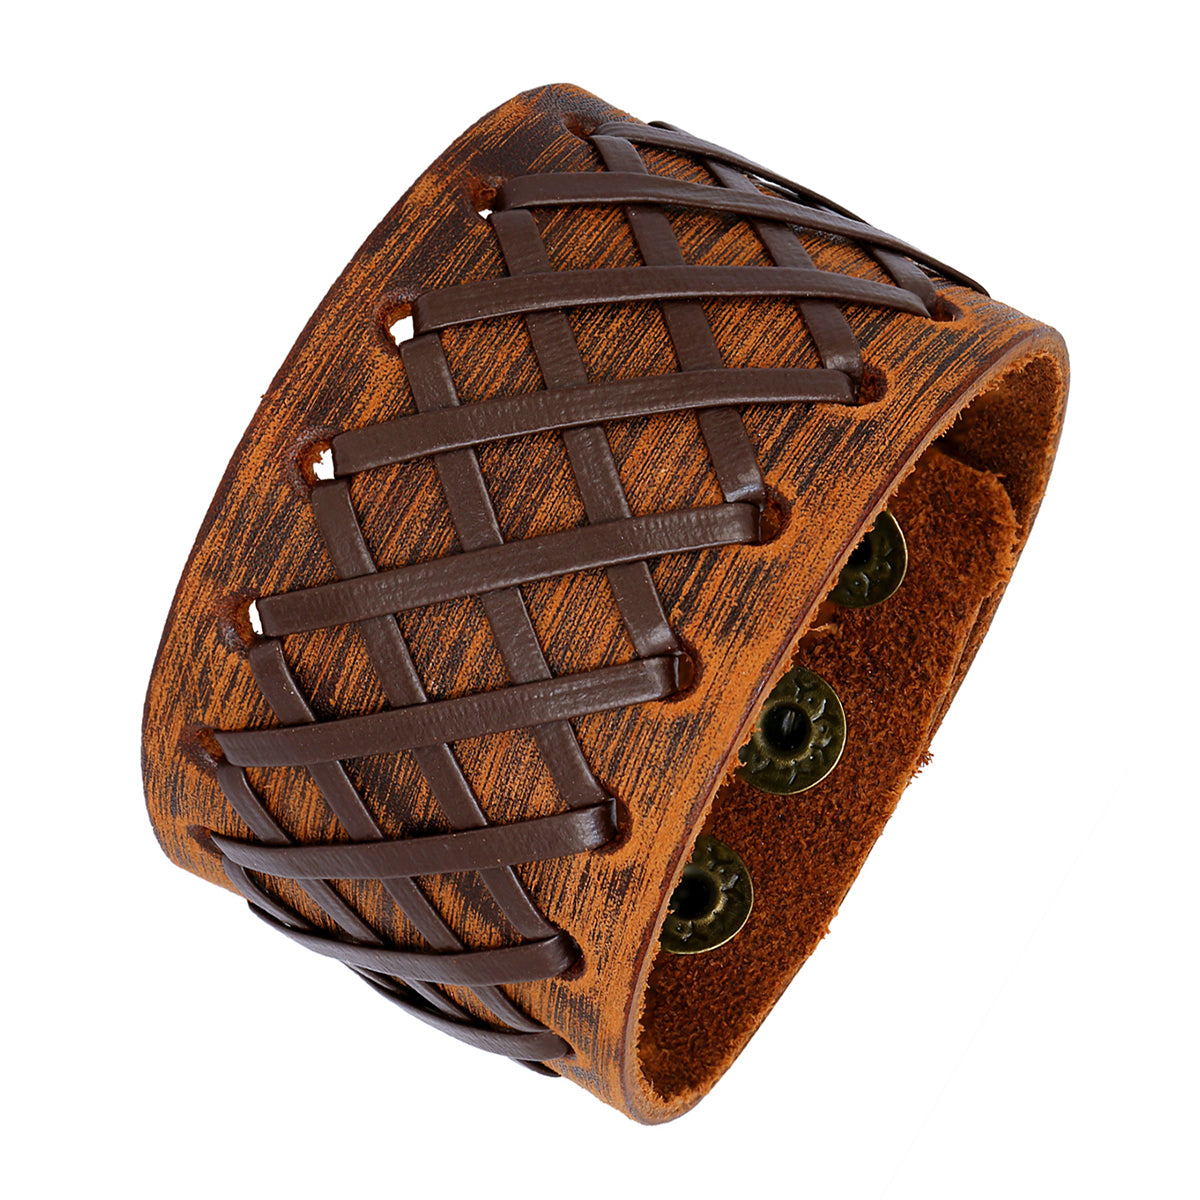 Stitched Braided Tan Brown Handcrafted Leather Wrist Band Bracelet Men